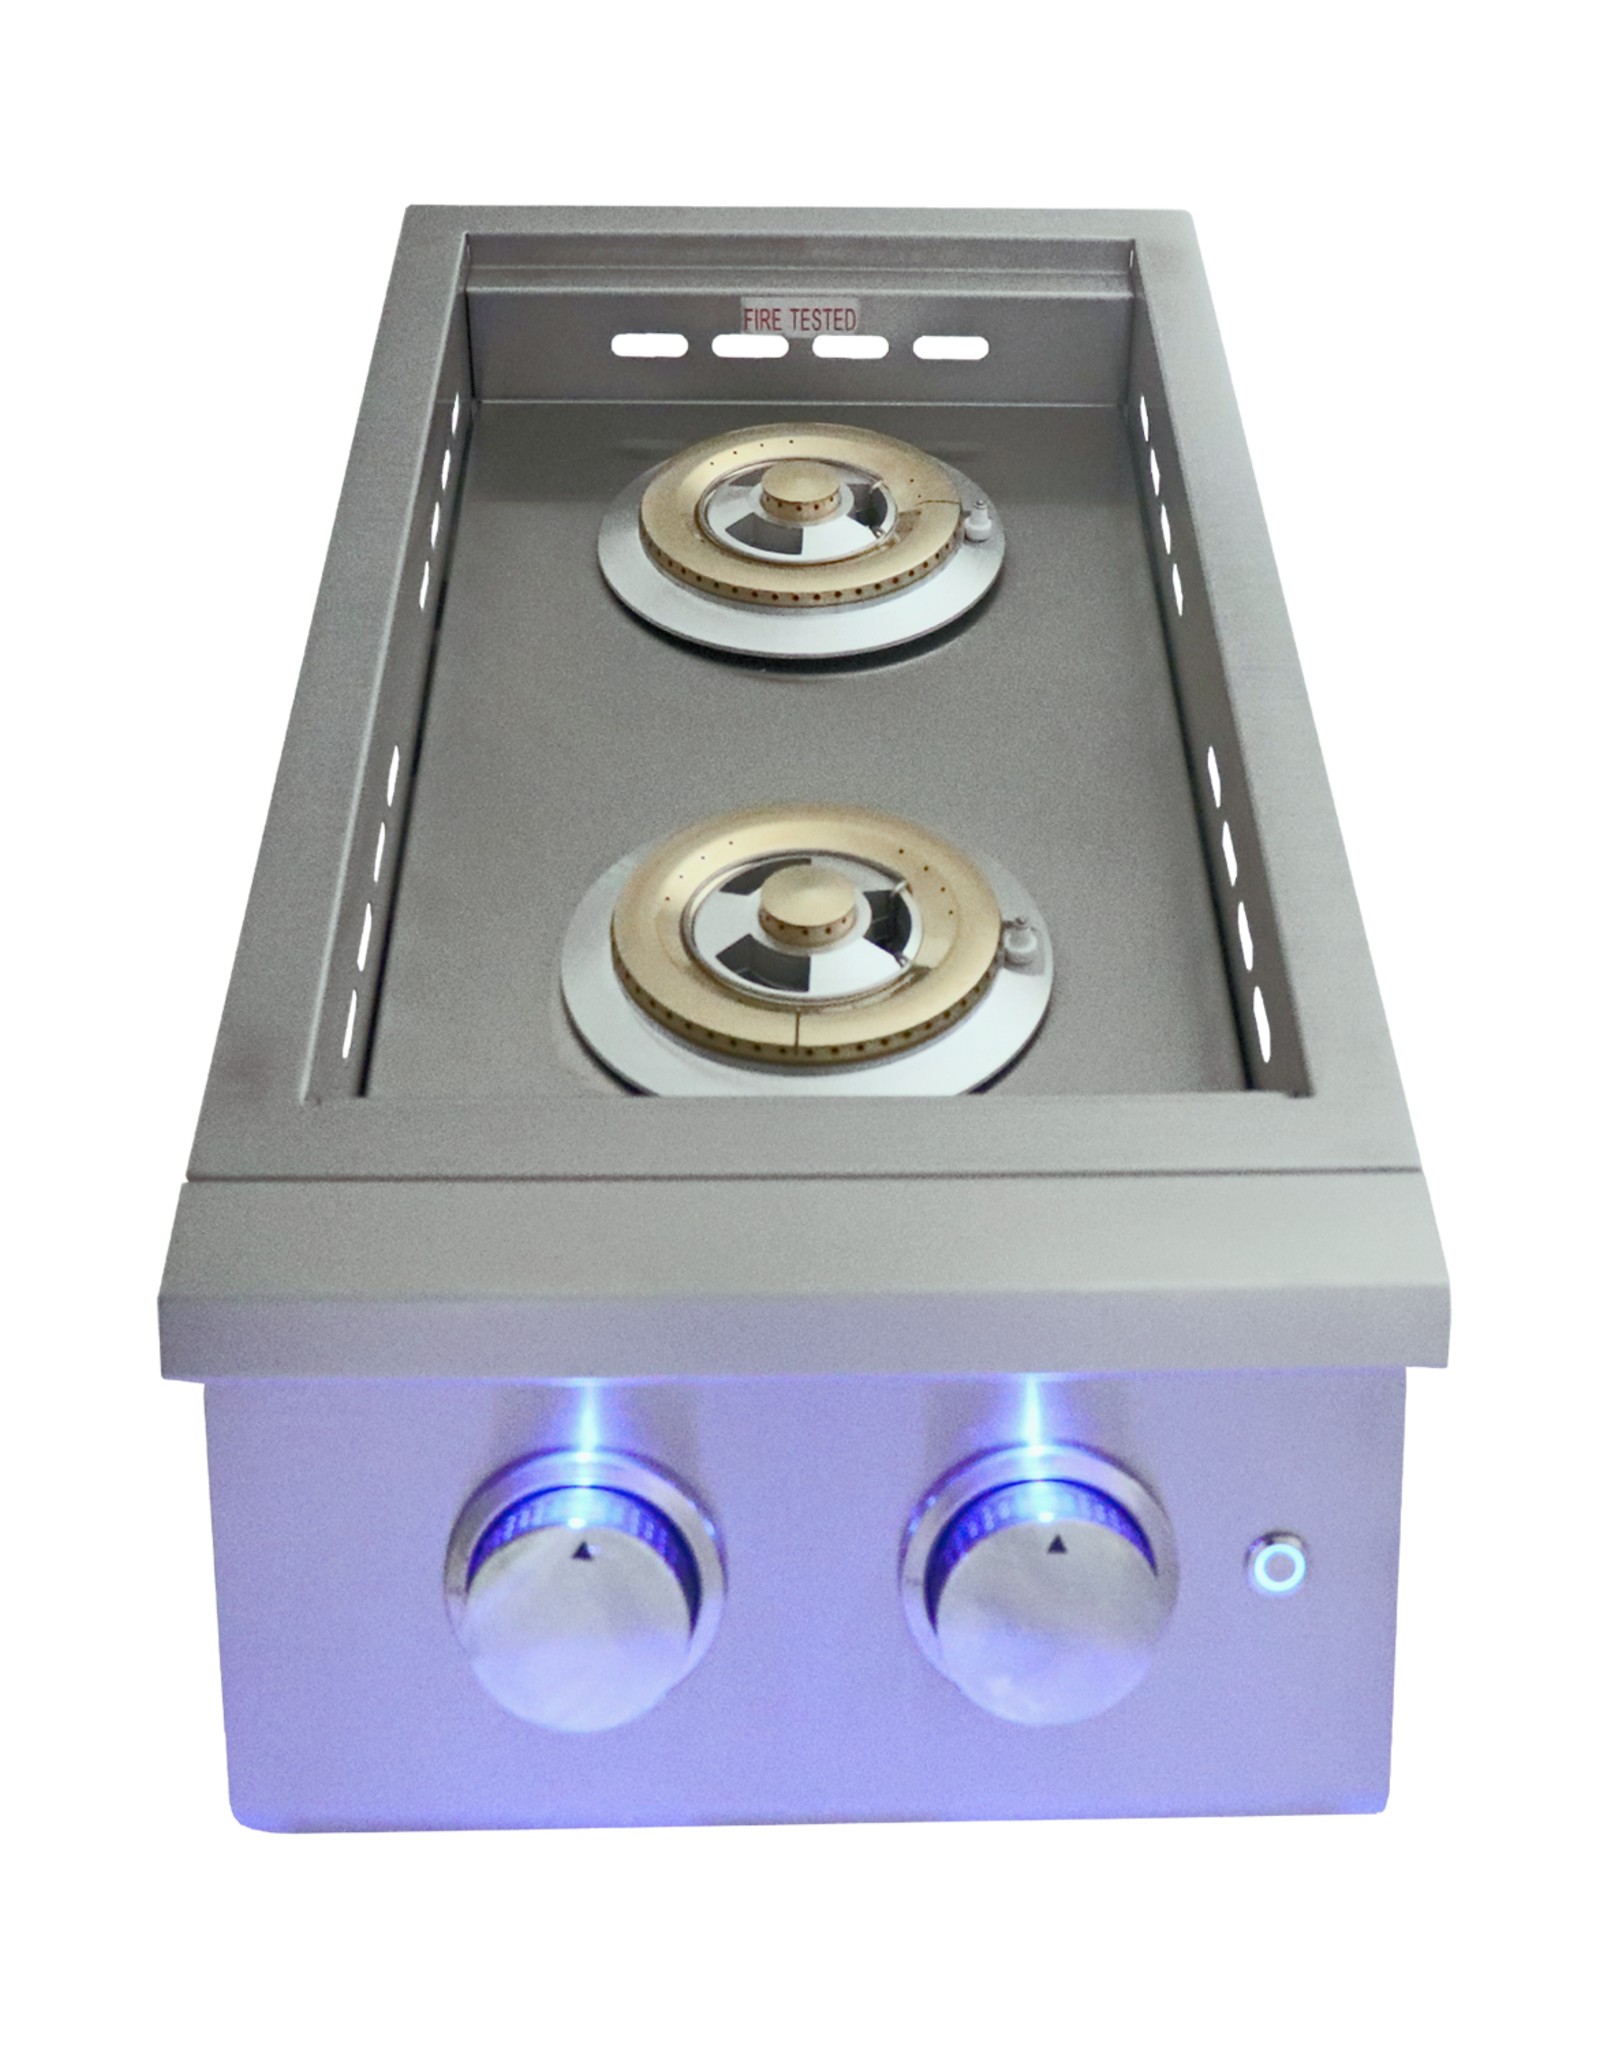 Renaissance Cooking Systems Renaissance Cooking Systems The Premier Series Double Side Burner with LED Lights - RJCSSBL